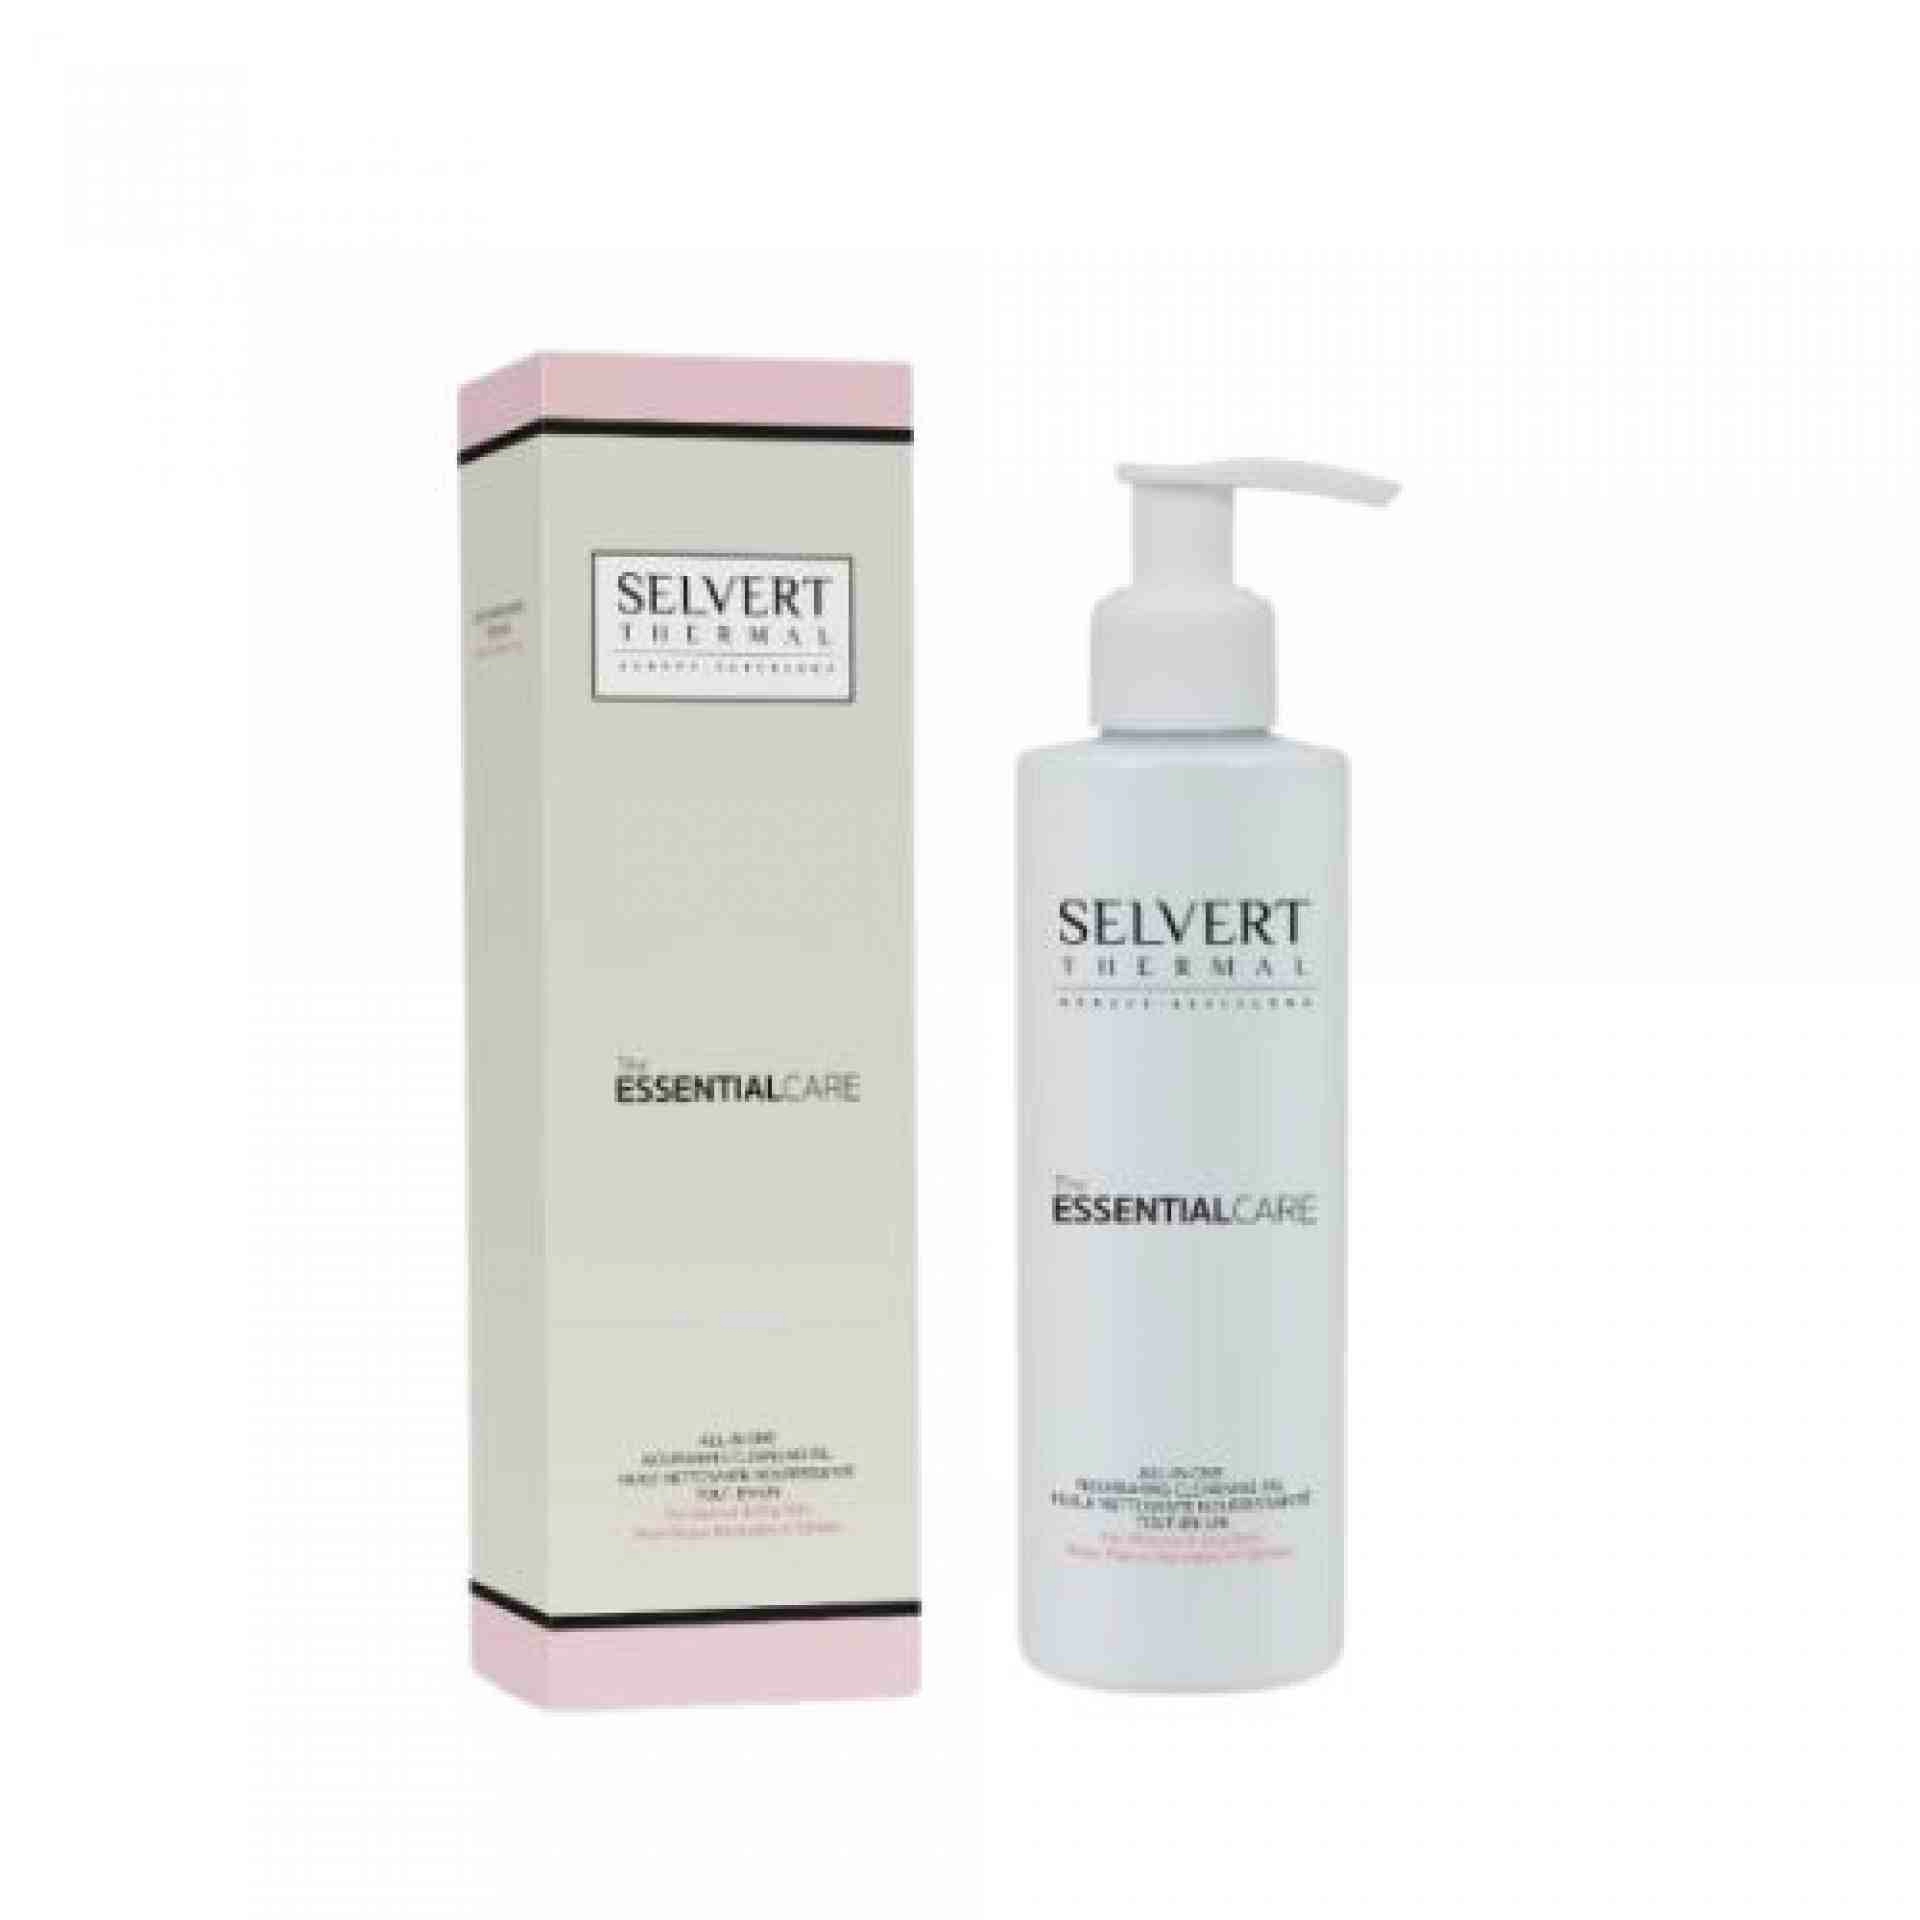 All-in-one Nourishing Cleansing OilFor Normal & Dry Skin | Aceite Limpiador 200 ml - The Essential Care - Selvert Thermal ®